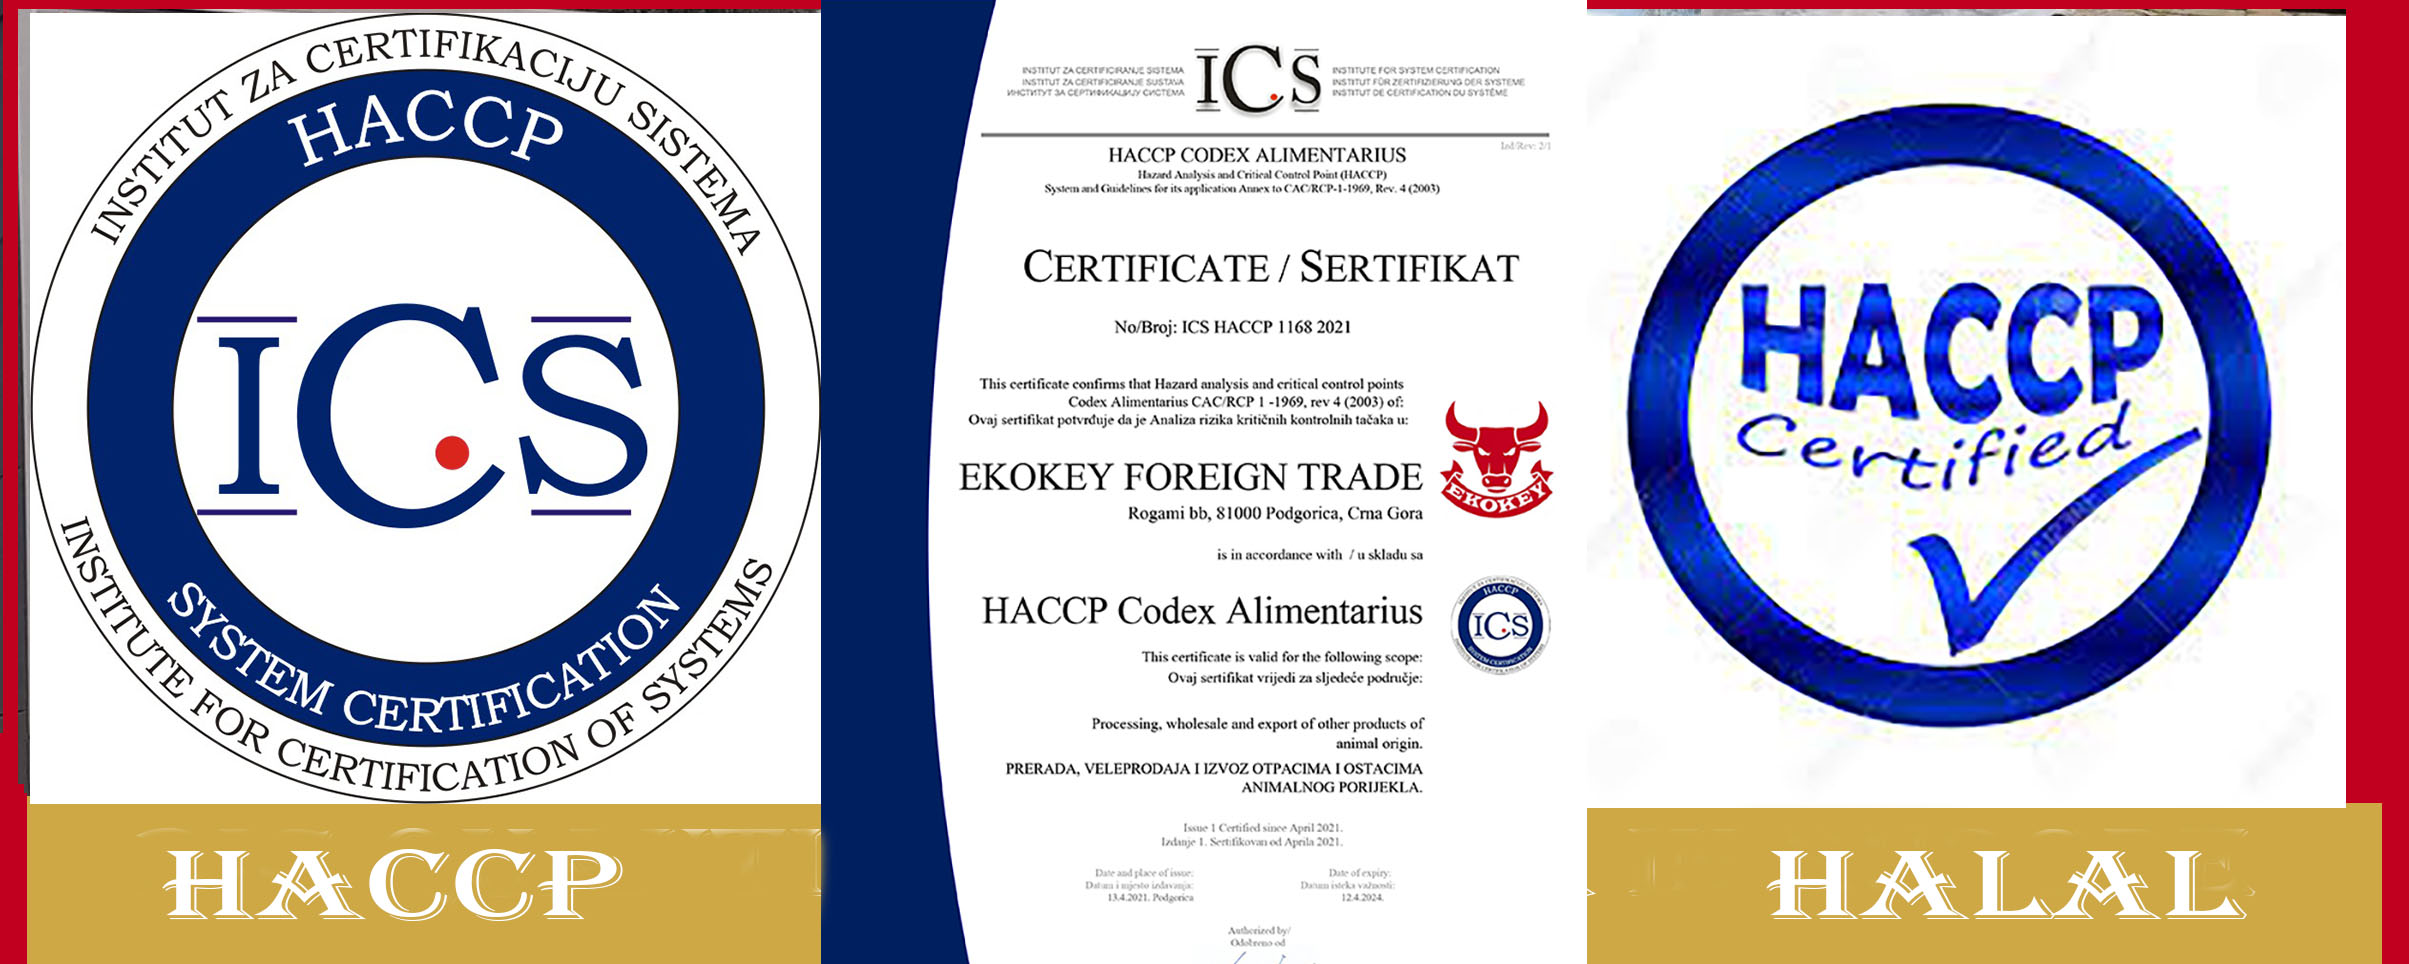 HACCP CERTIFICATE and HALAL